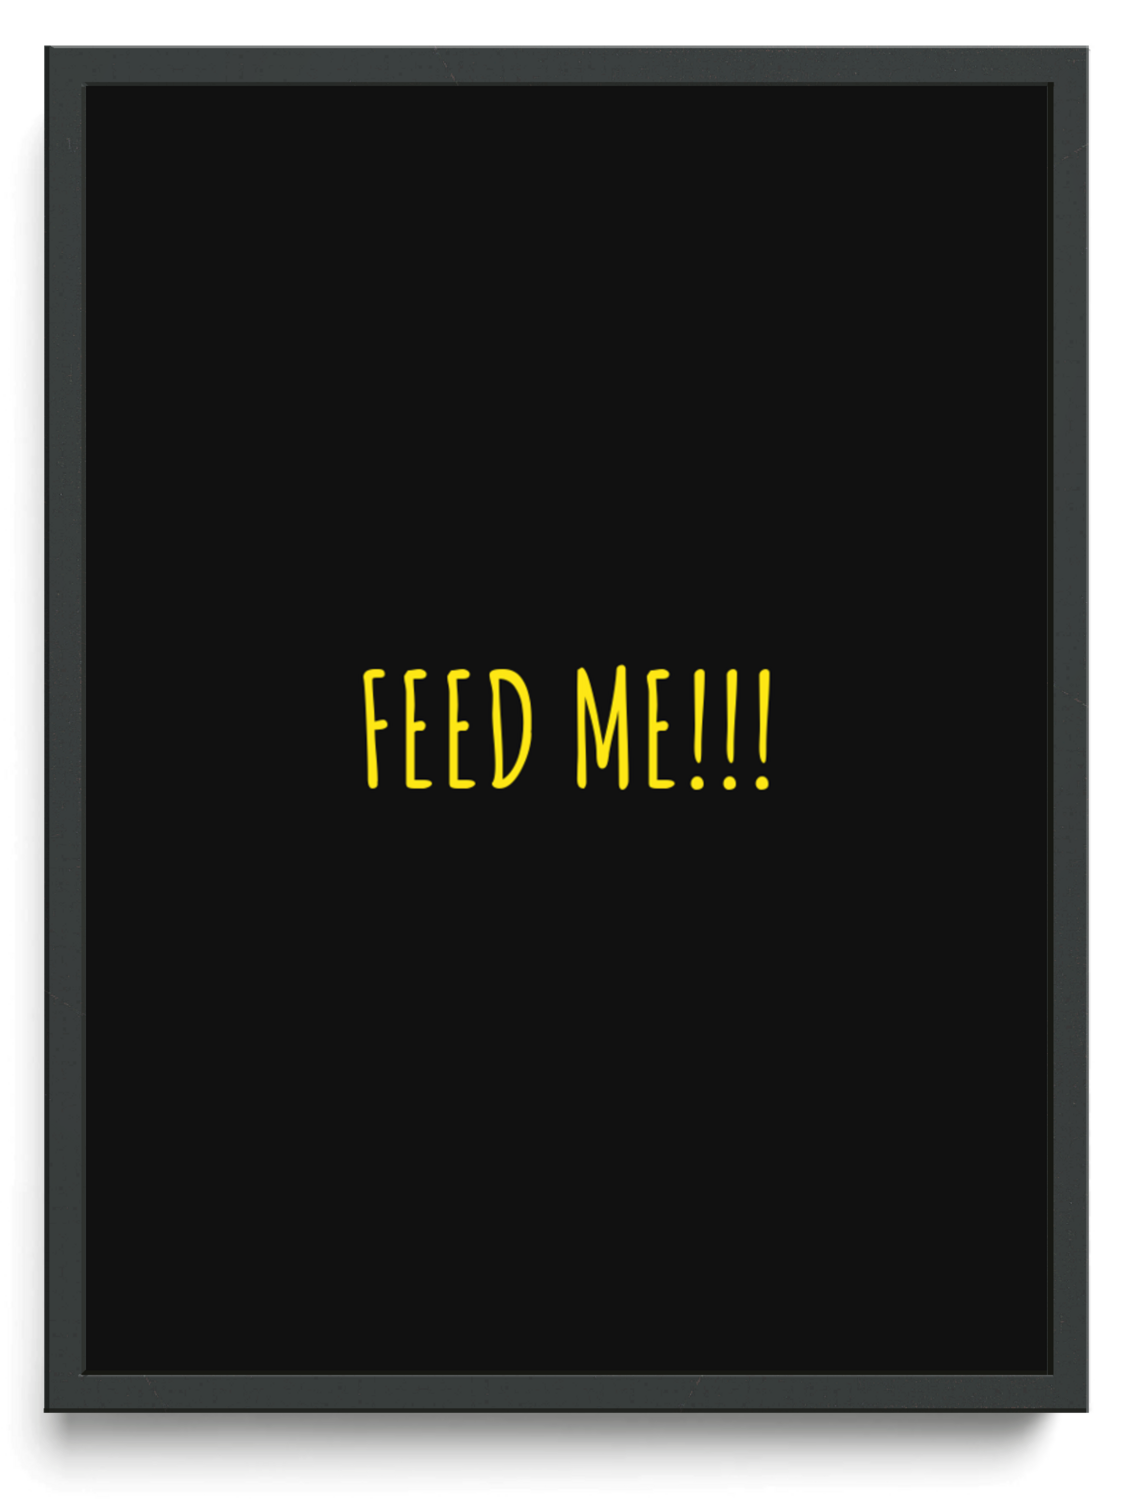 FEED ME framed typographic print